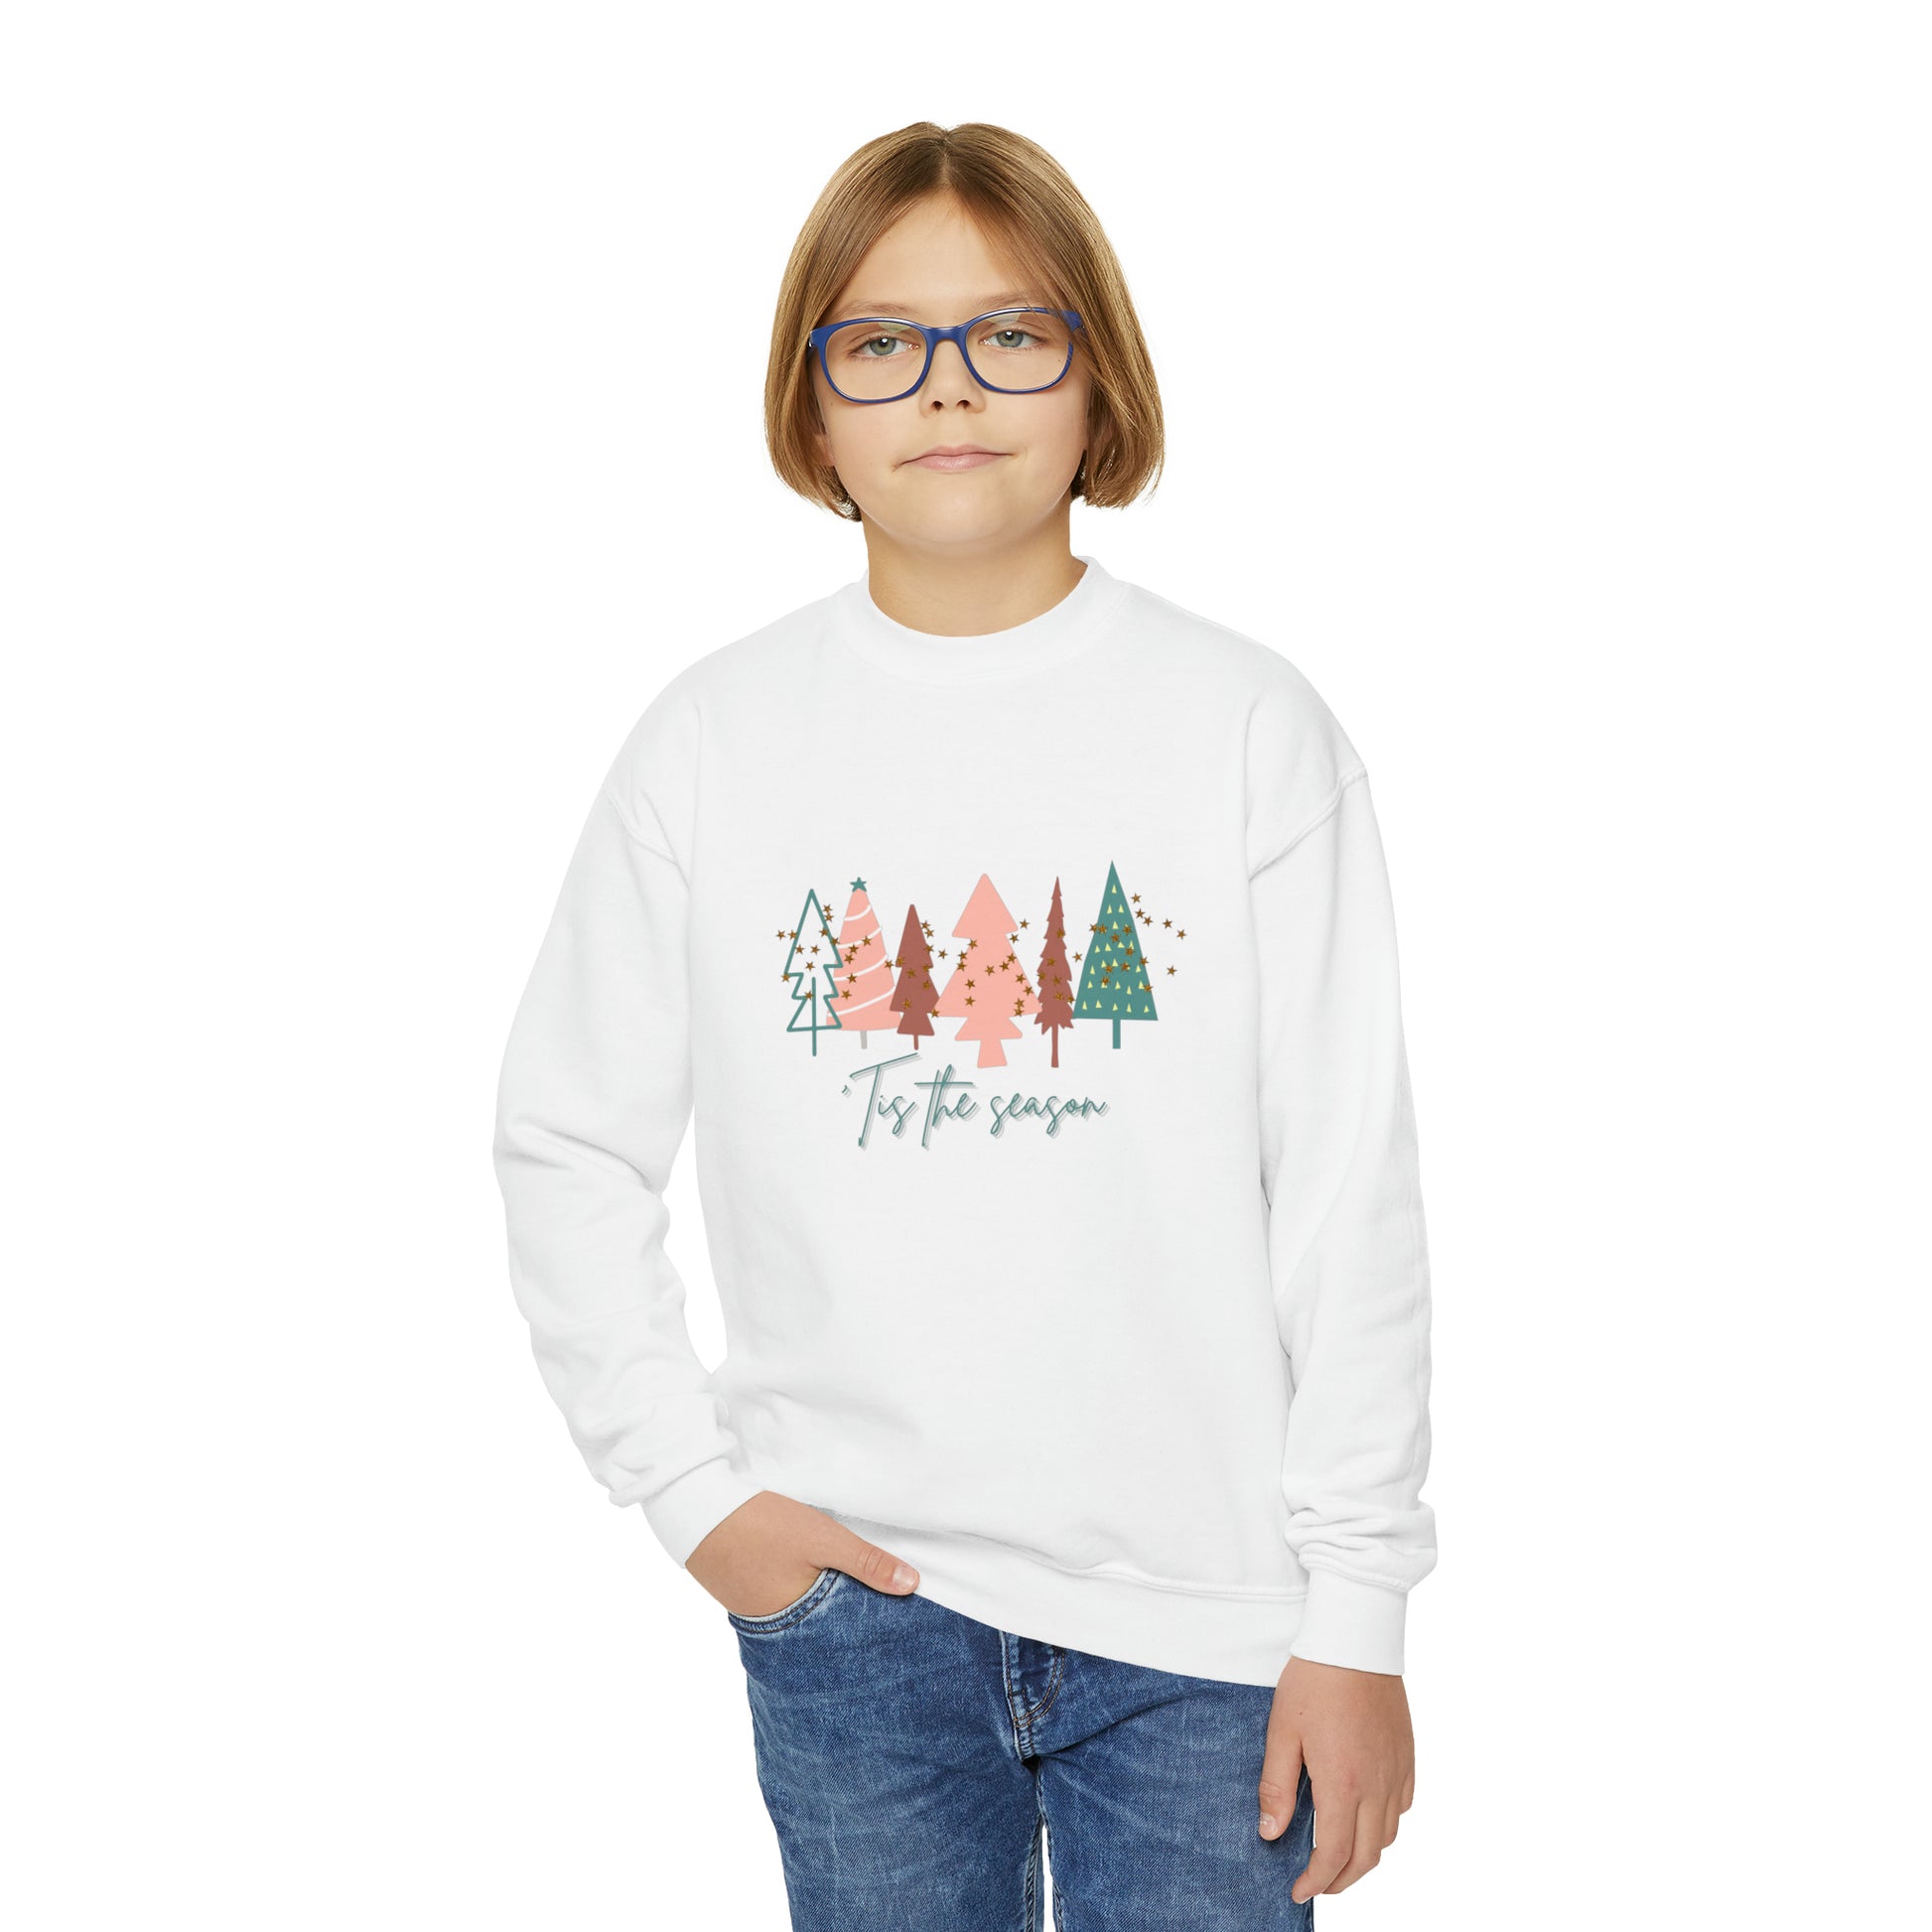 A young girl wearing a cozy white Gildan Youth Sweatshirt with trees on it, made by Printify.